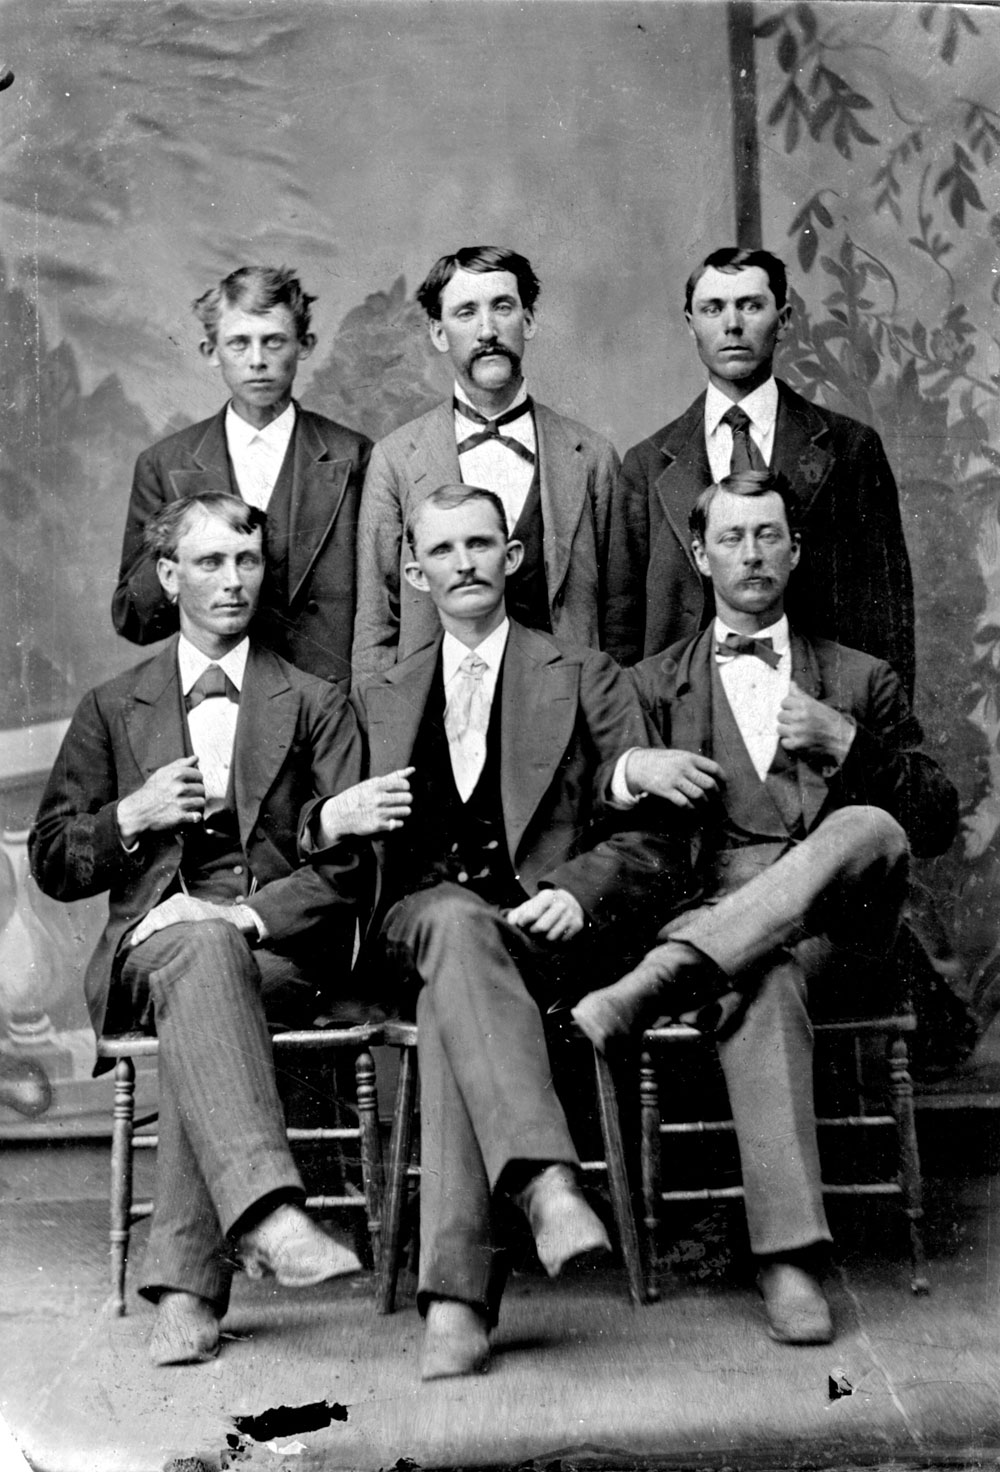 This image, one of my favorites, was taken in Butler, DeKalb County, Indiana. The date is unknown but I would guess the 1880s. It is possible these men are members of the Bordner or Beerer families. The print was found in the Oberlin family archival collection.  John Oberlin Sheridan. View full size.